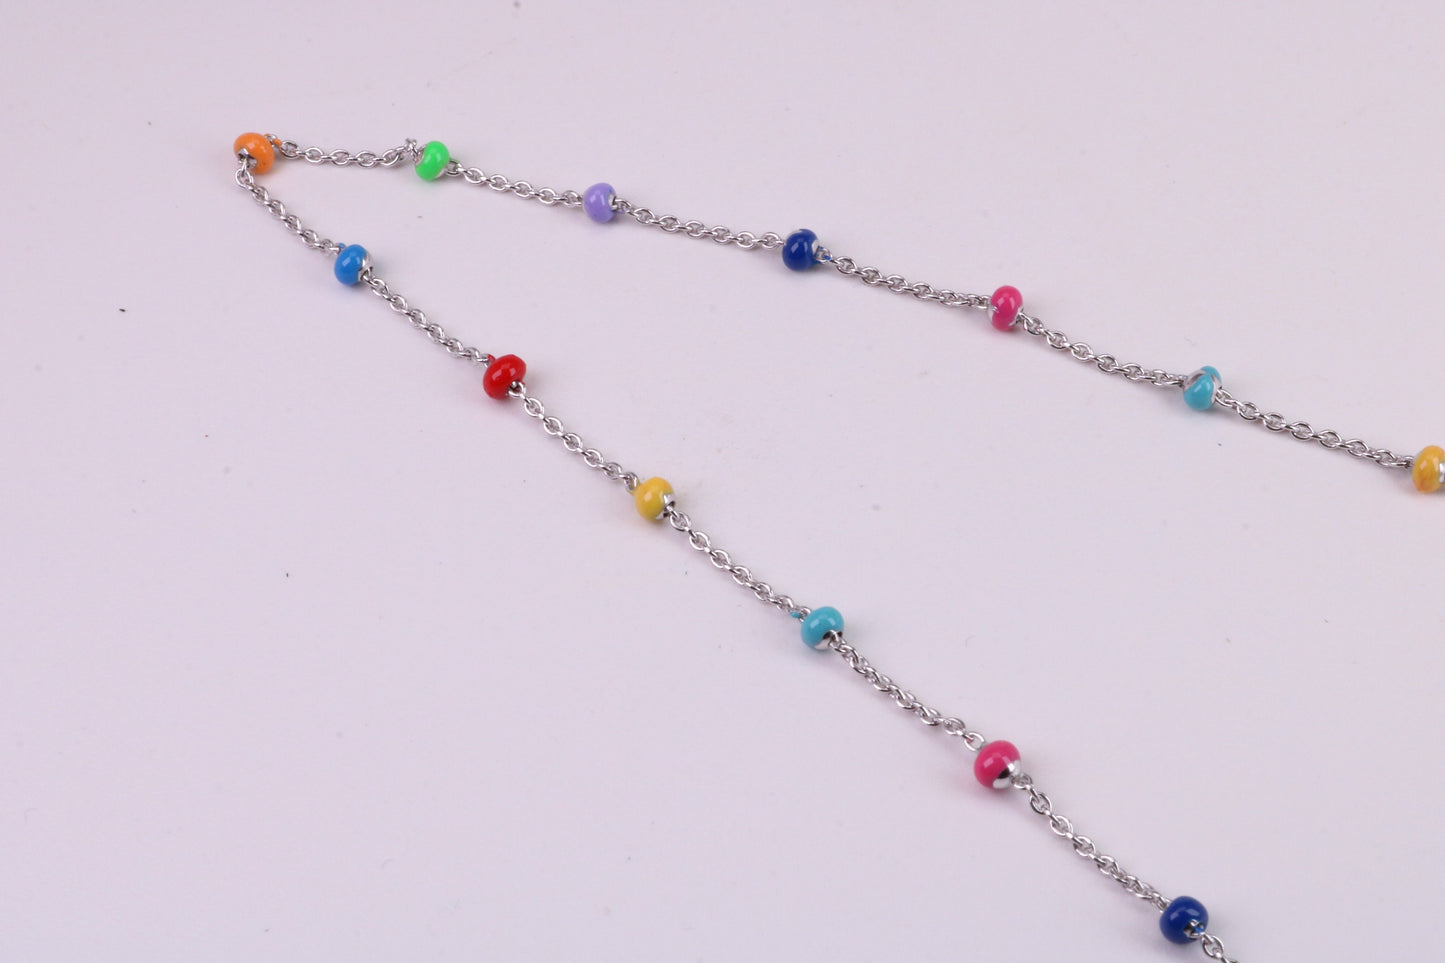 Rainbow Necklace, made from solid Sterling Silver, Length Adjustable Chain